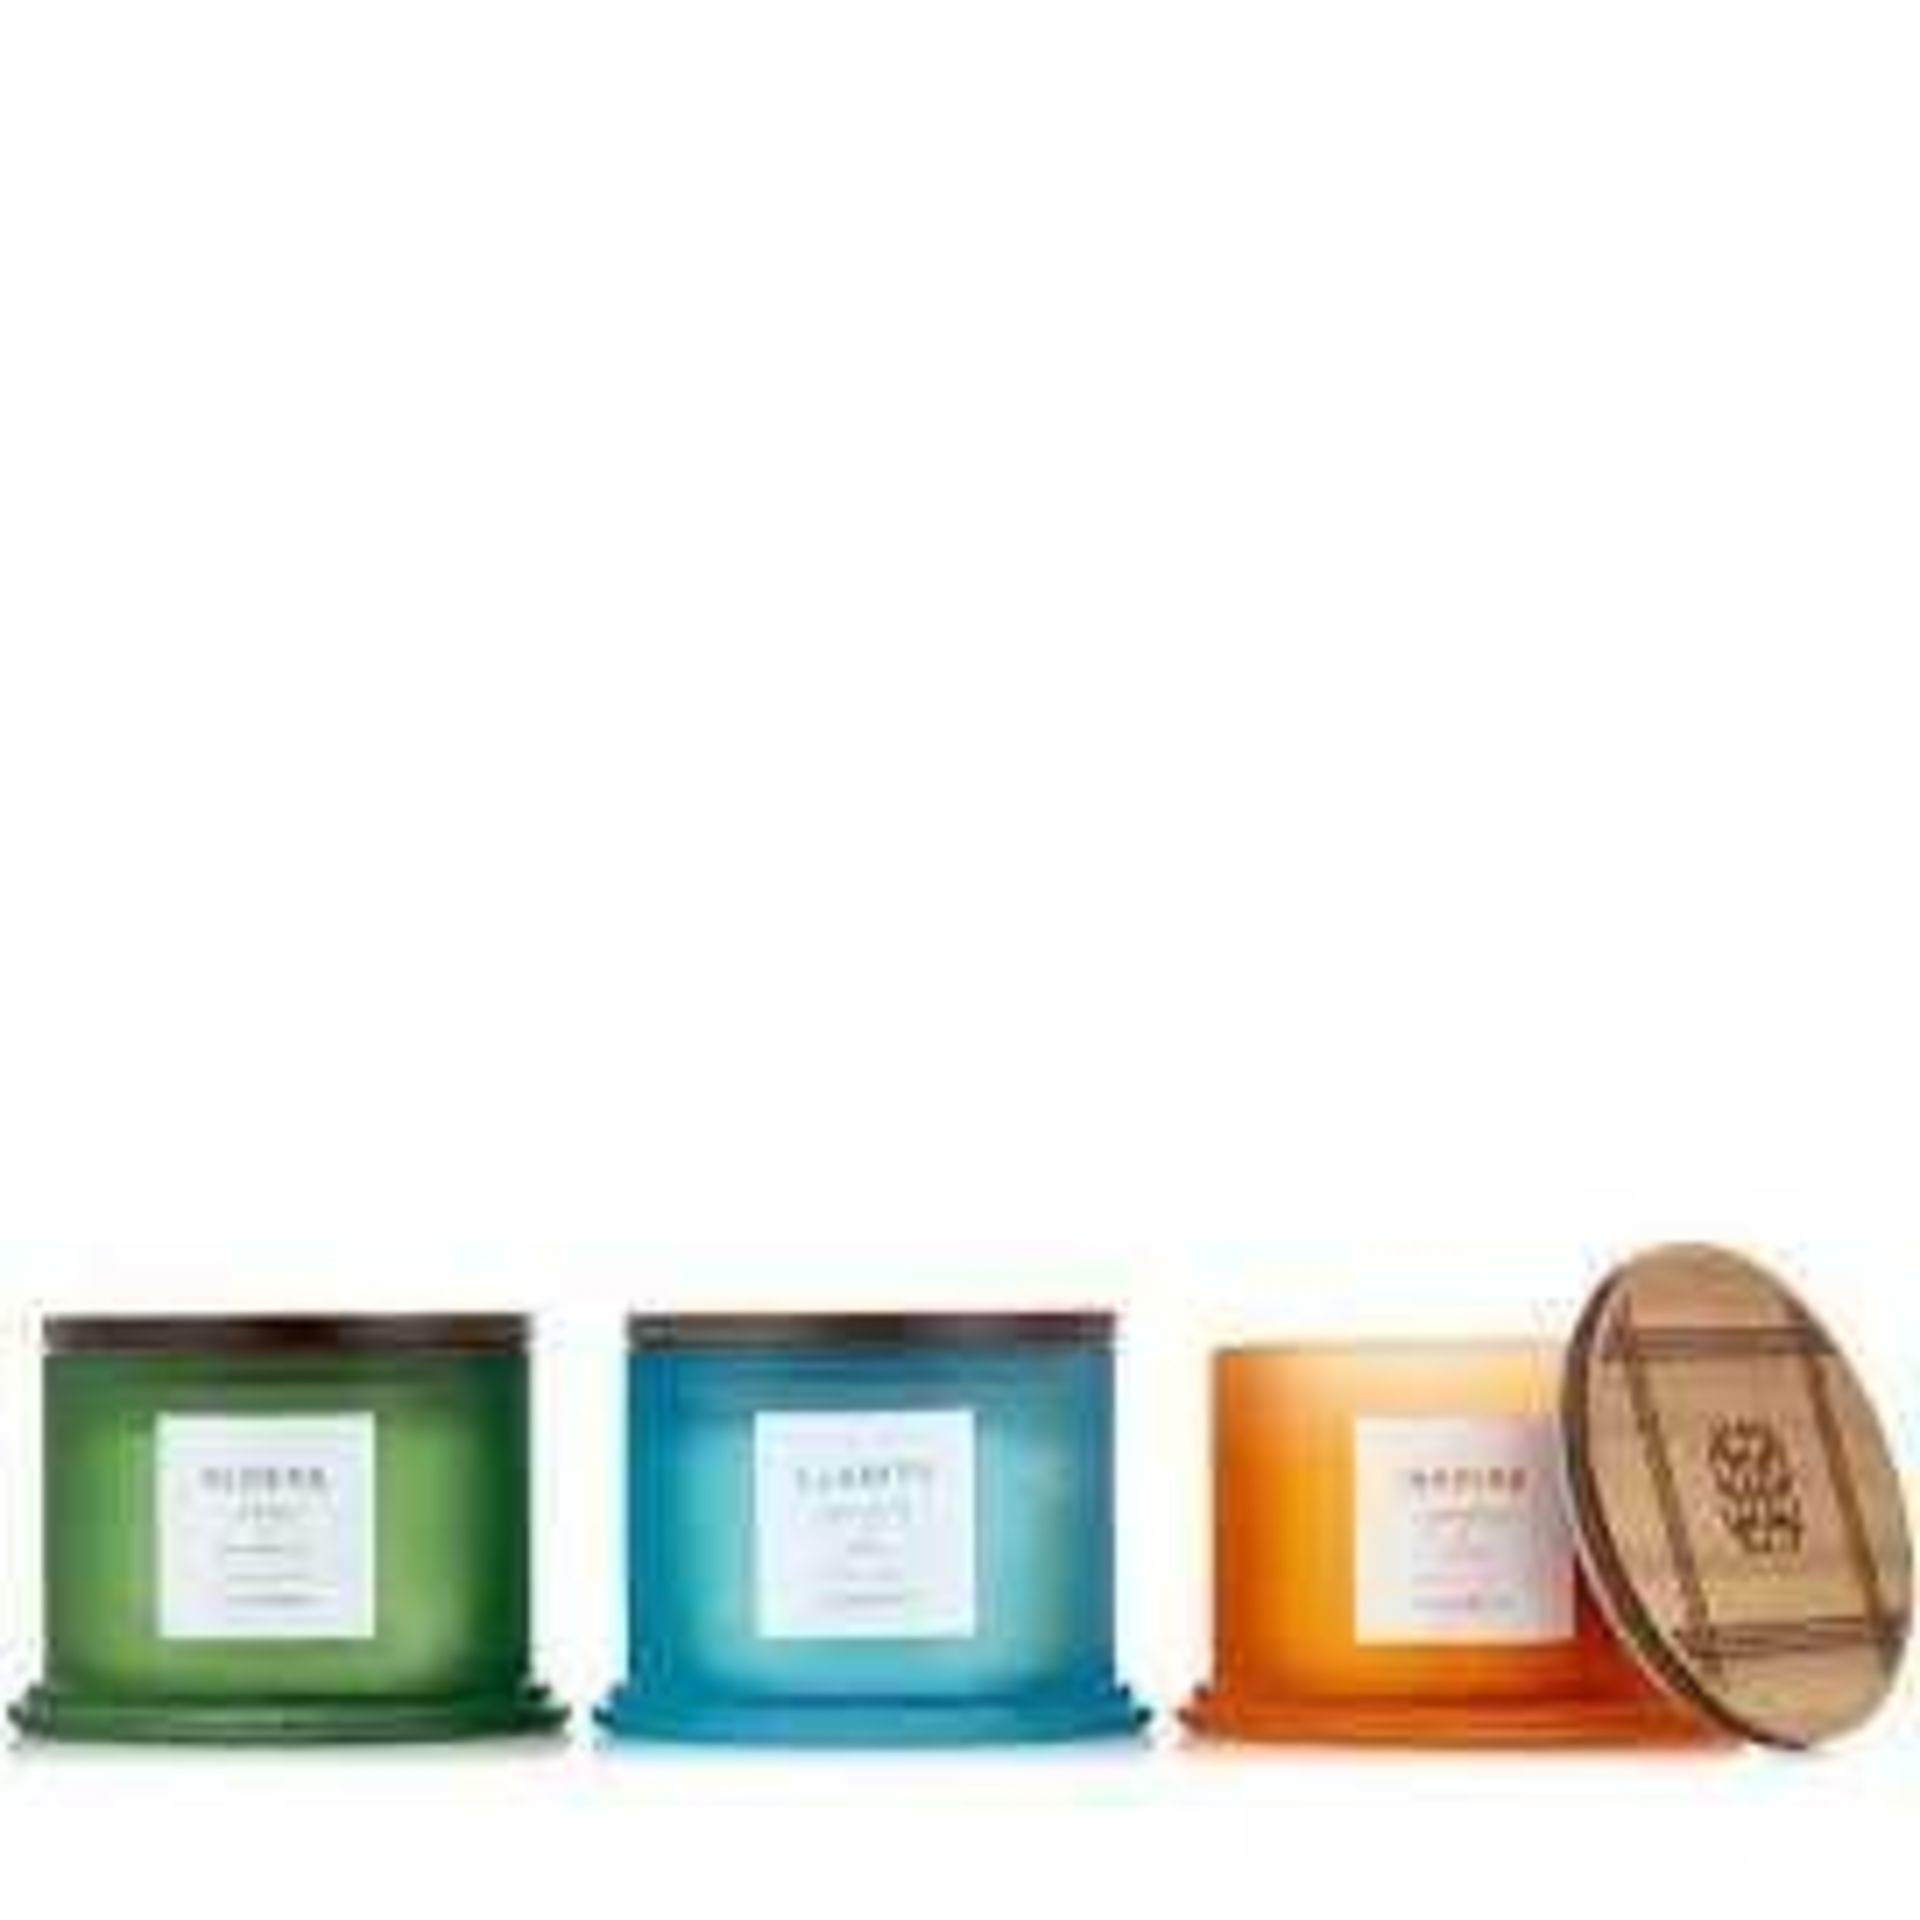 RRP £100 lot to contain 2 New Boxed Homework by Harry Slat kin 3pck Three wick candles